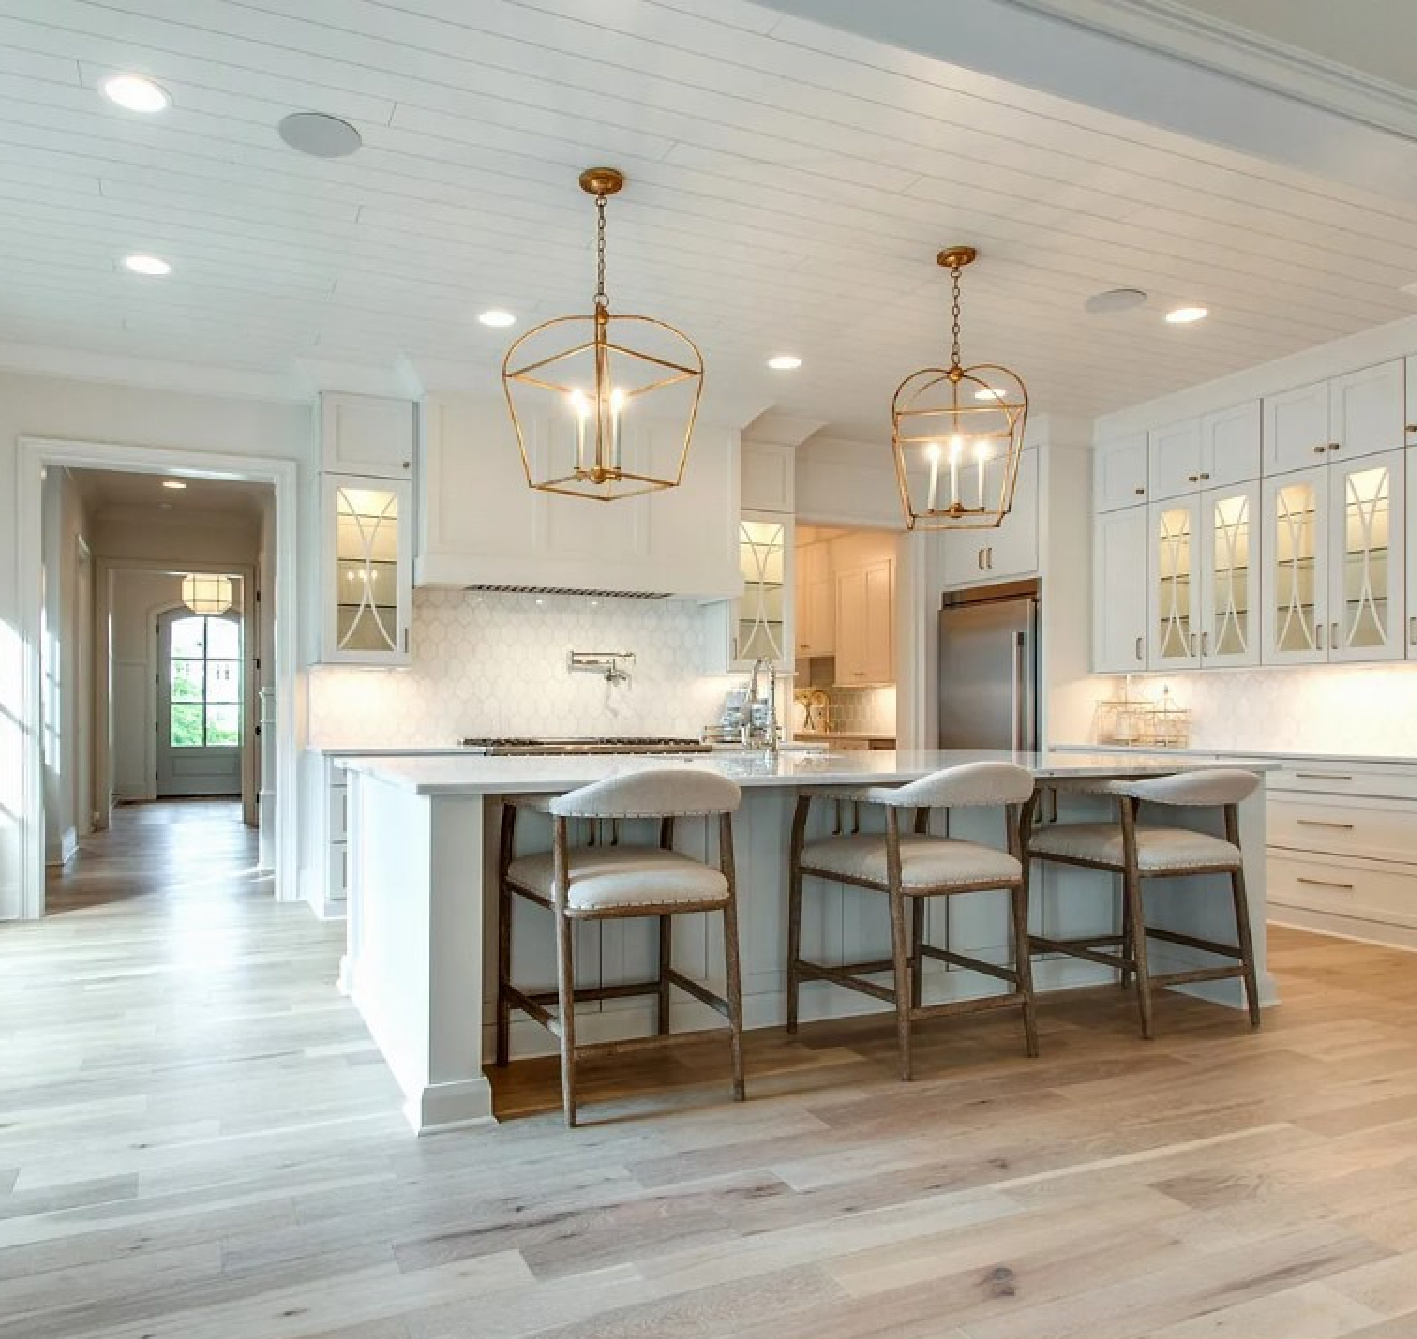 Classic and beautiful white kitchen with island and warm wood floors in a Sipple Home on Pasquo in Franklin, TN.